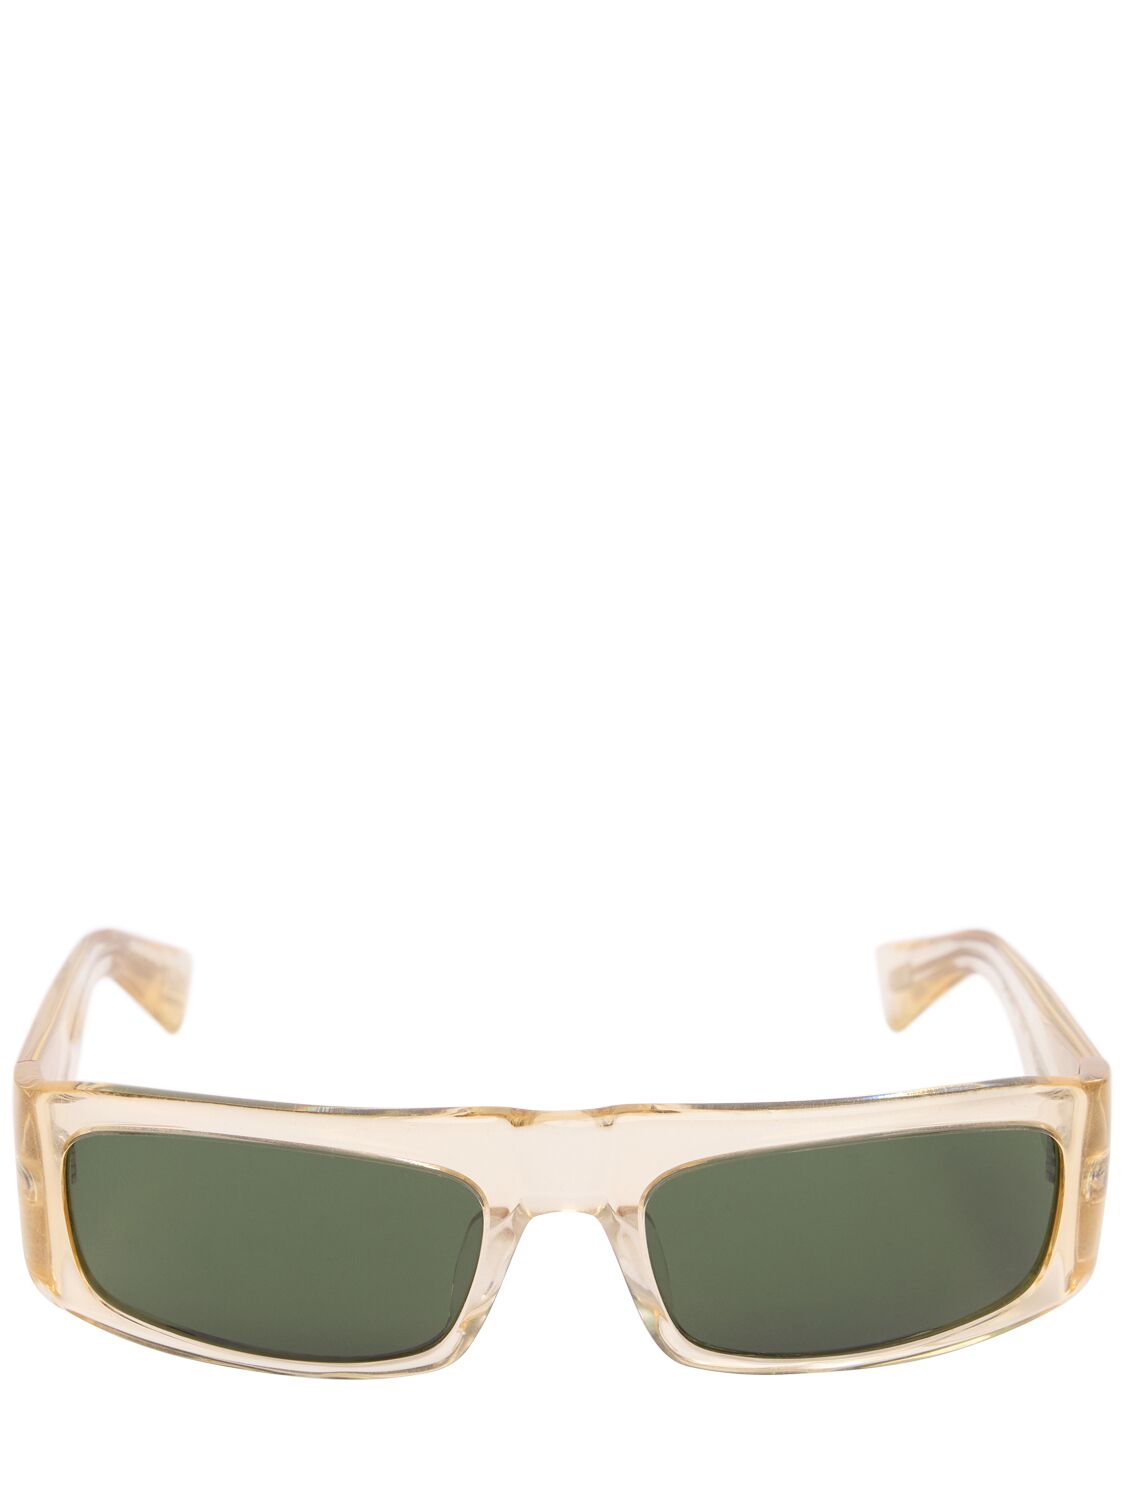 Khaite X Oliver People Square Sunglasses In Buff,green